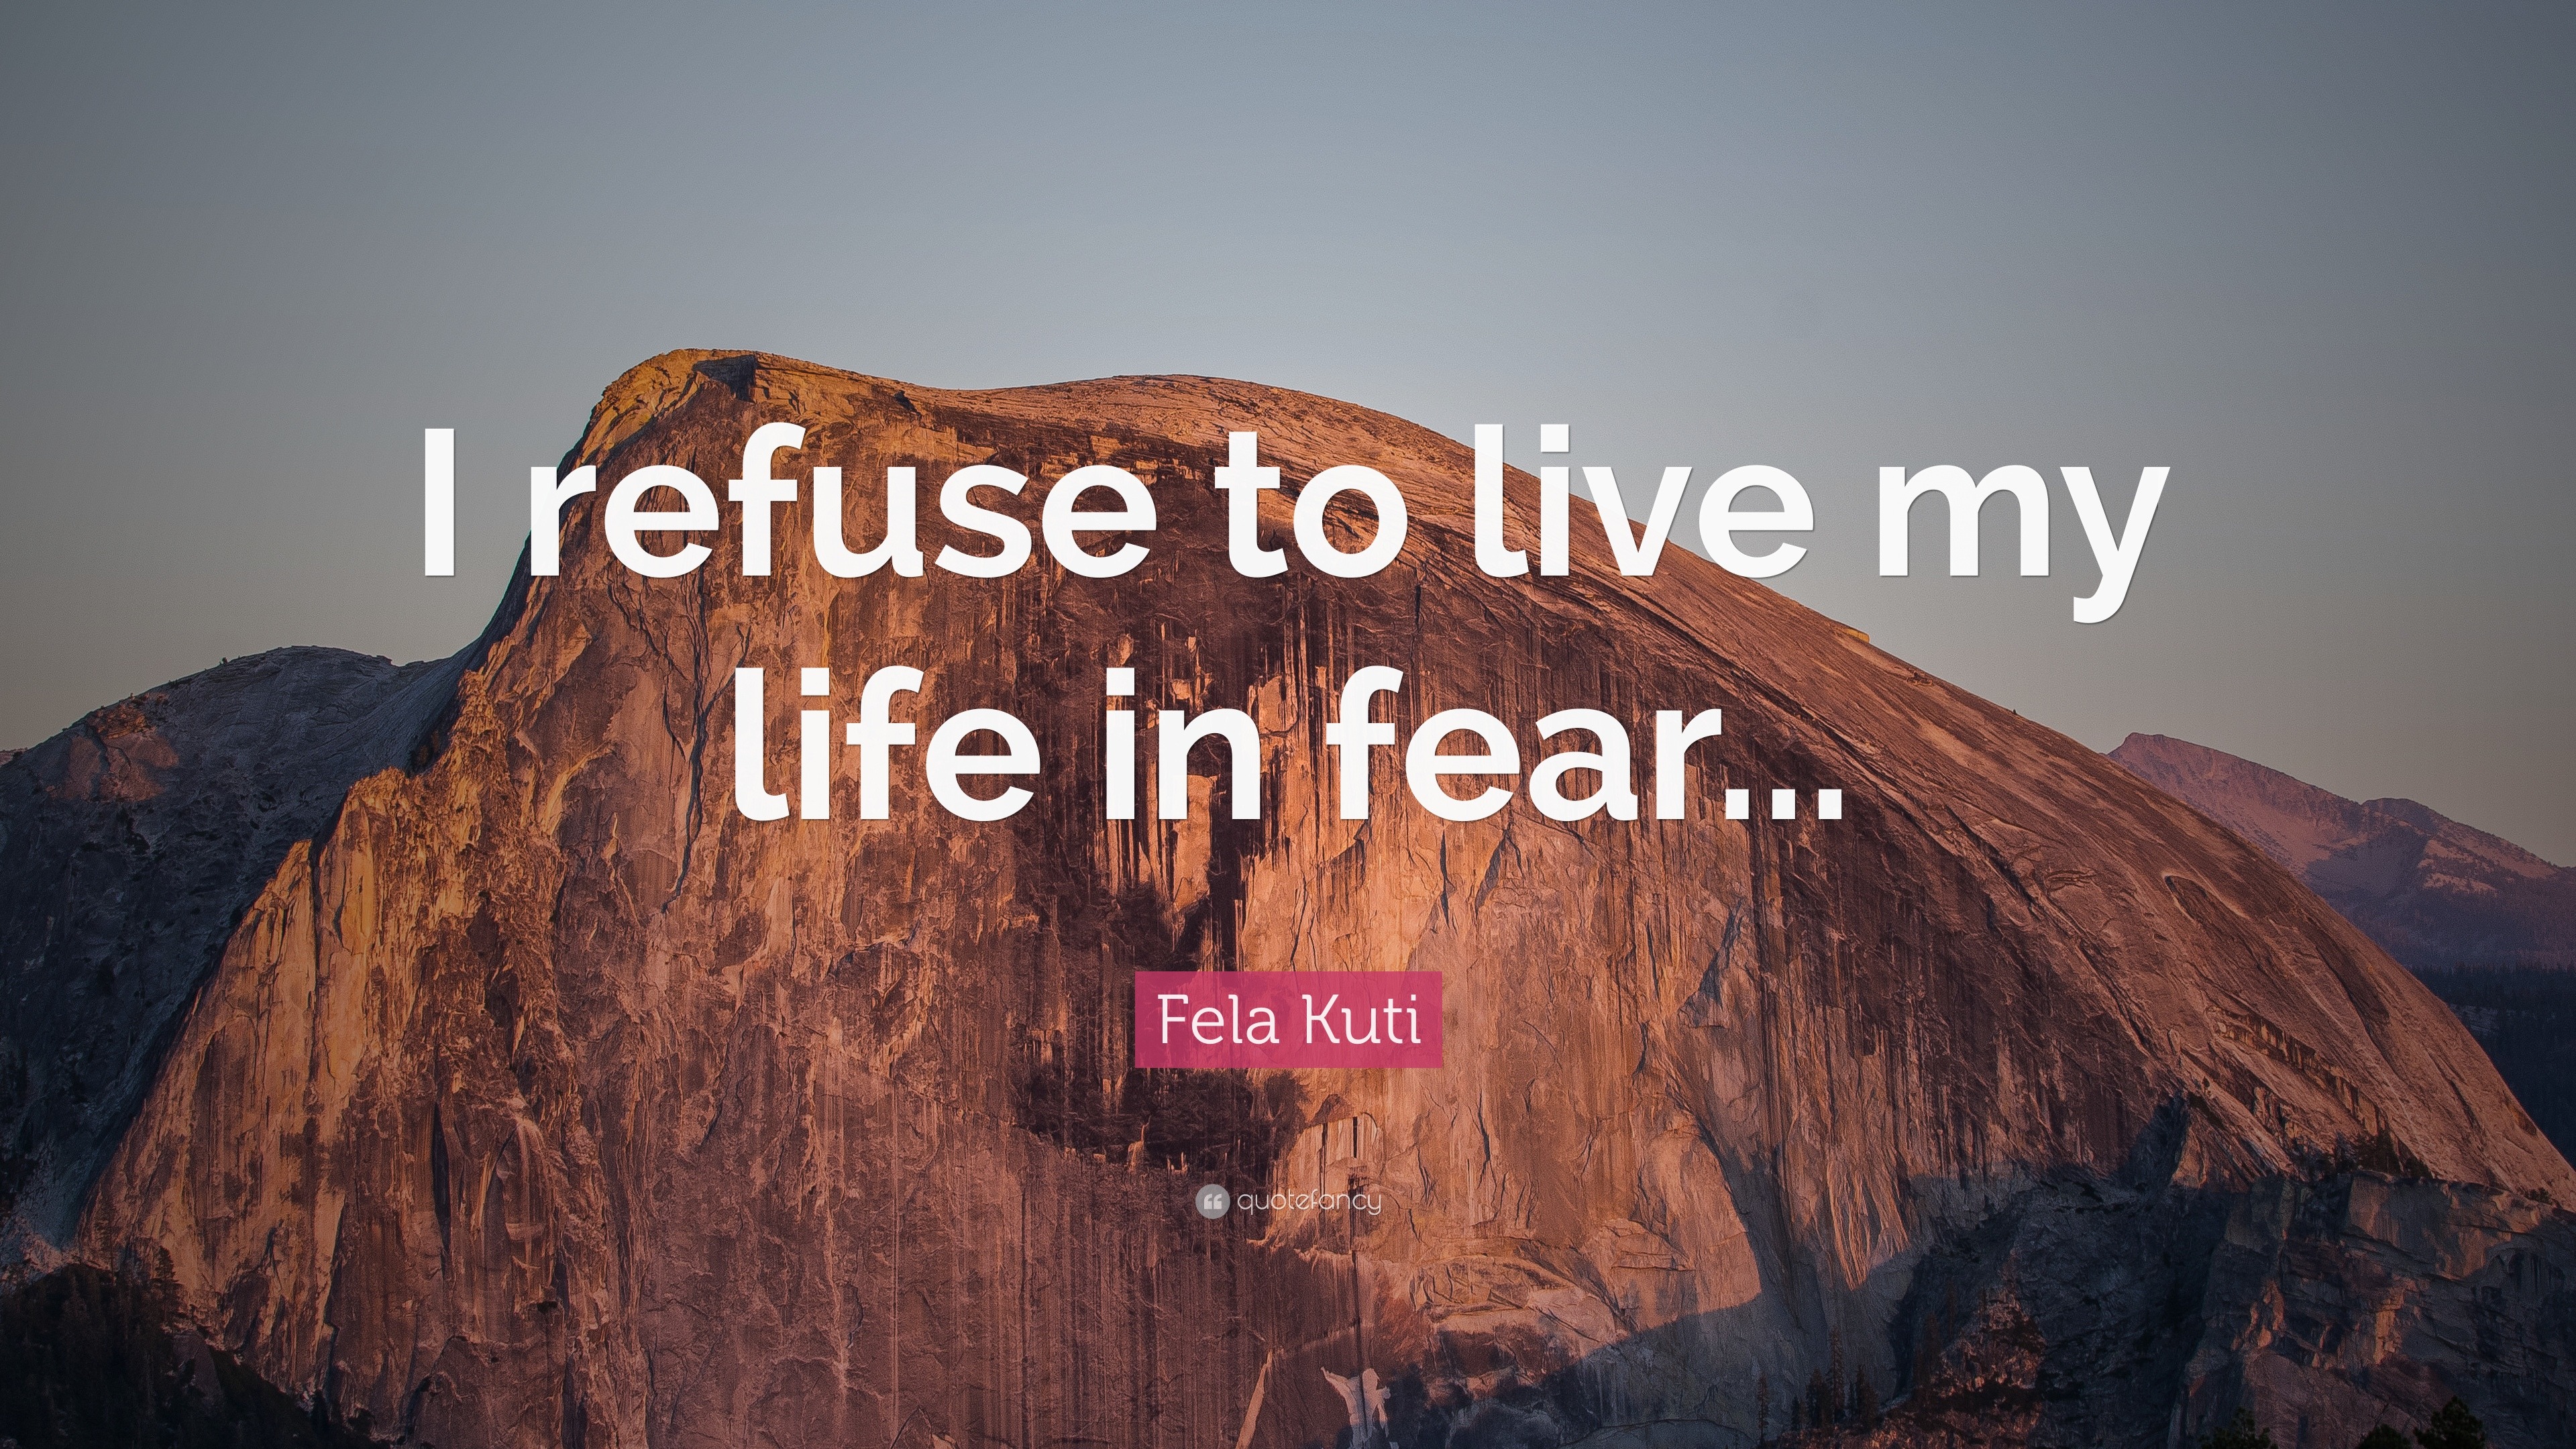 Fela Kuti Quote “I refuse to live my life in fear...”